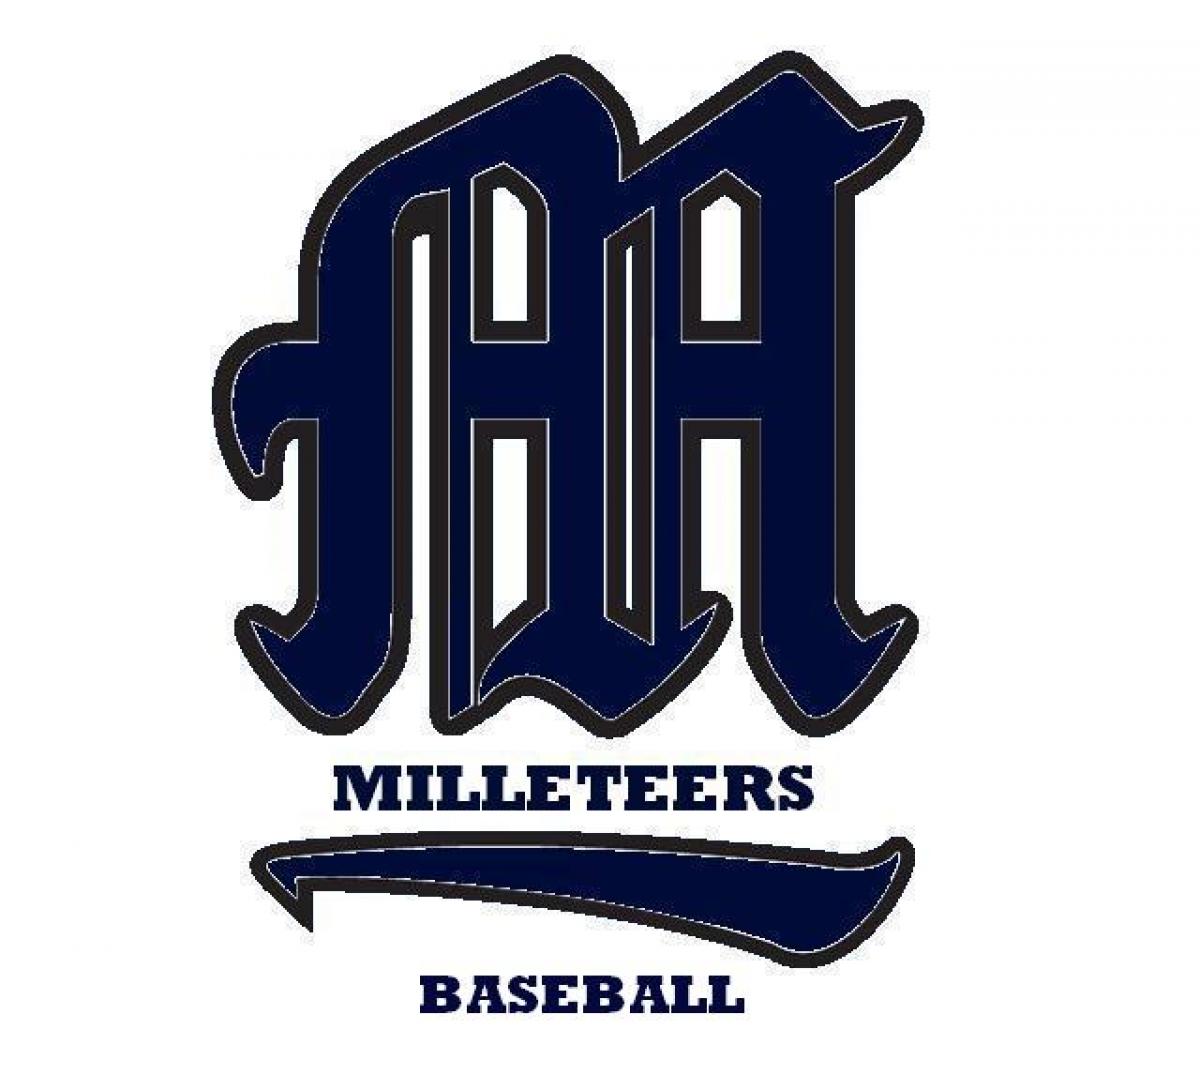 Holden Bests The Milleteers In First Place Battle